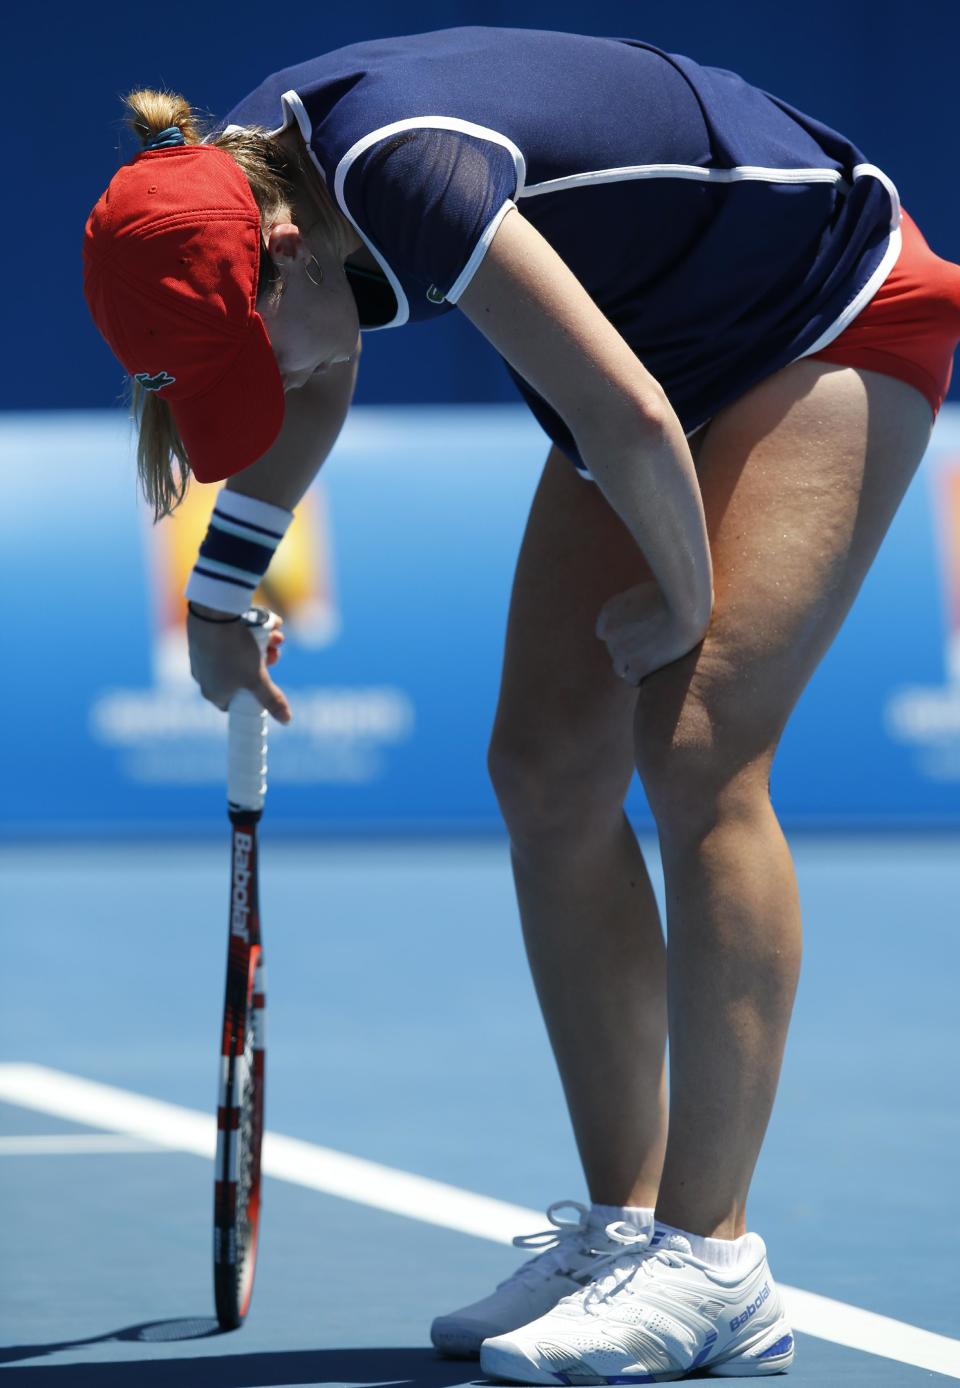 Alize Cornet of France rests on her racket during her second round match against Camila Giorgi of Italy at the Australian Open tennis championship in Melbourne, Australia, Thursday, Jan. 16, 2014.(AP Photo/Eugene Hoshiko)